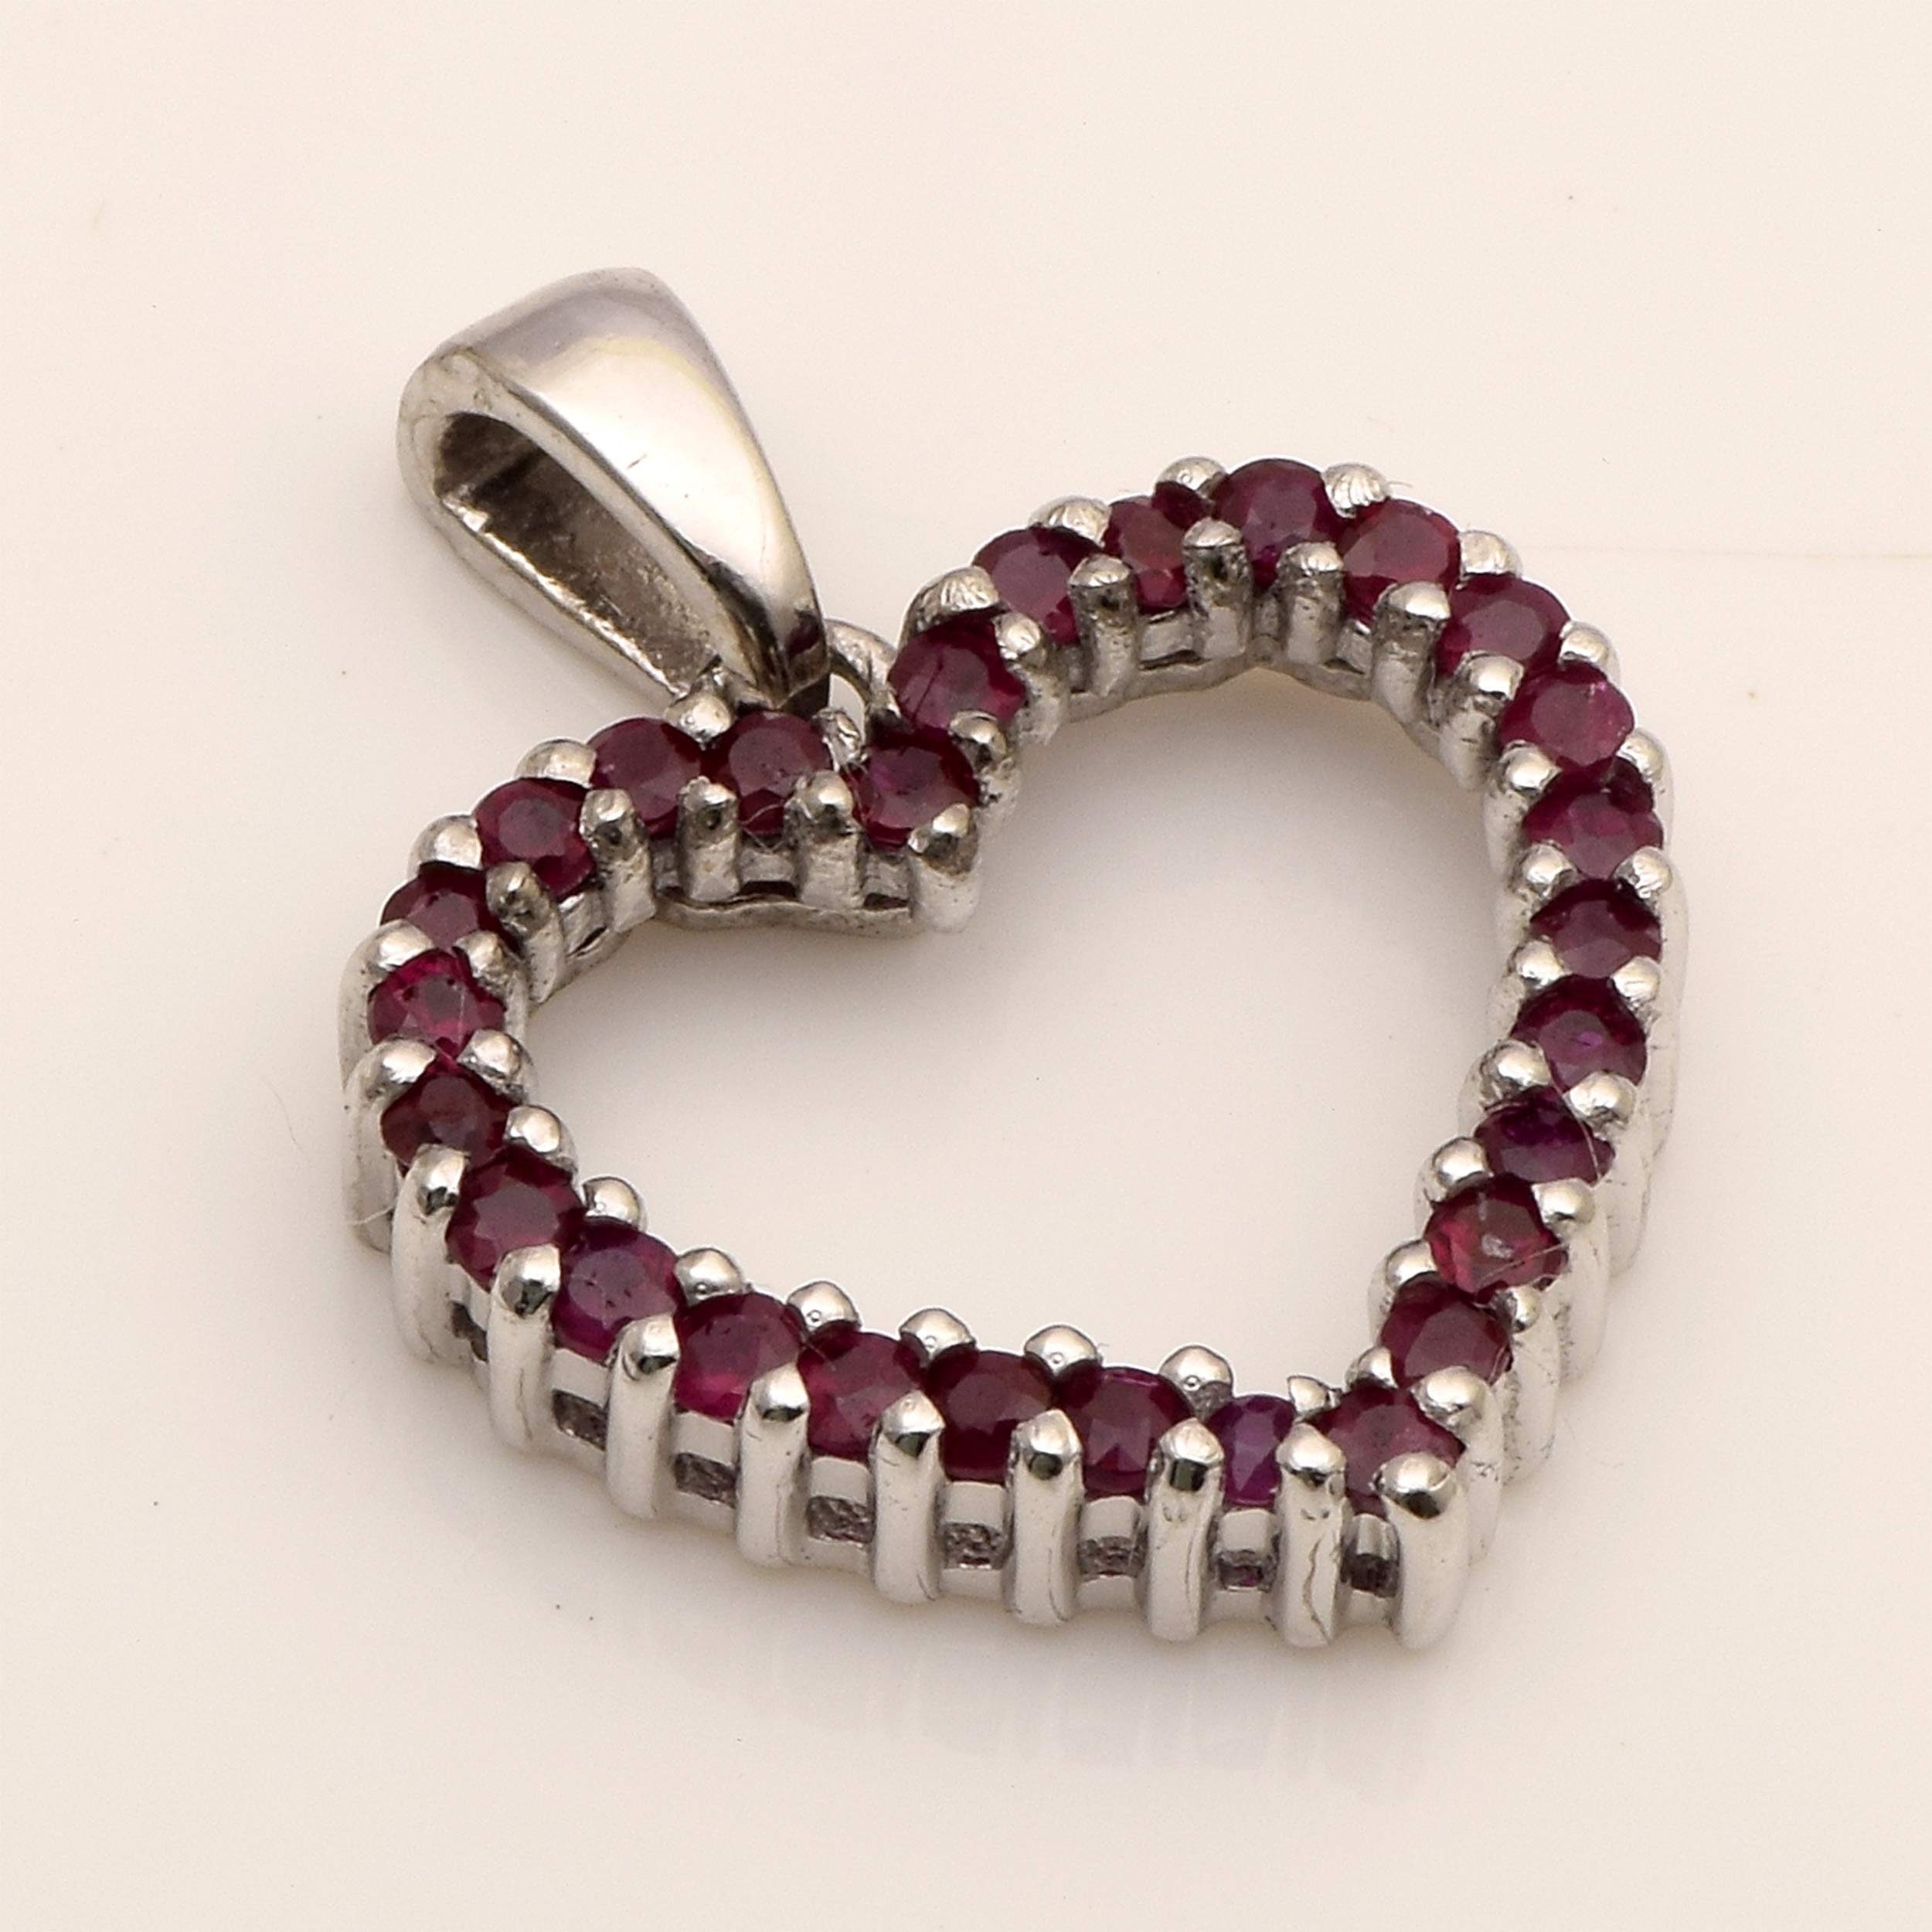 Shine Jewel Open Heart Pendant !! 925 Sterling Silver 1.20 Ctw Natural Gemstone Wedding Gift for her Pendant (ruby)